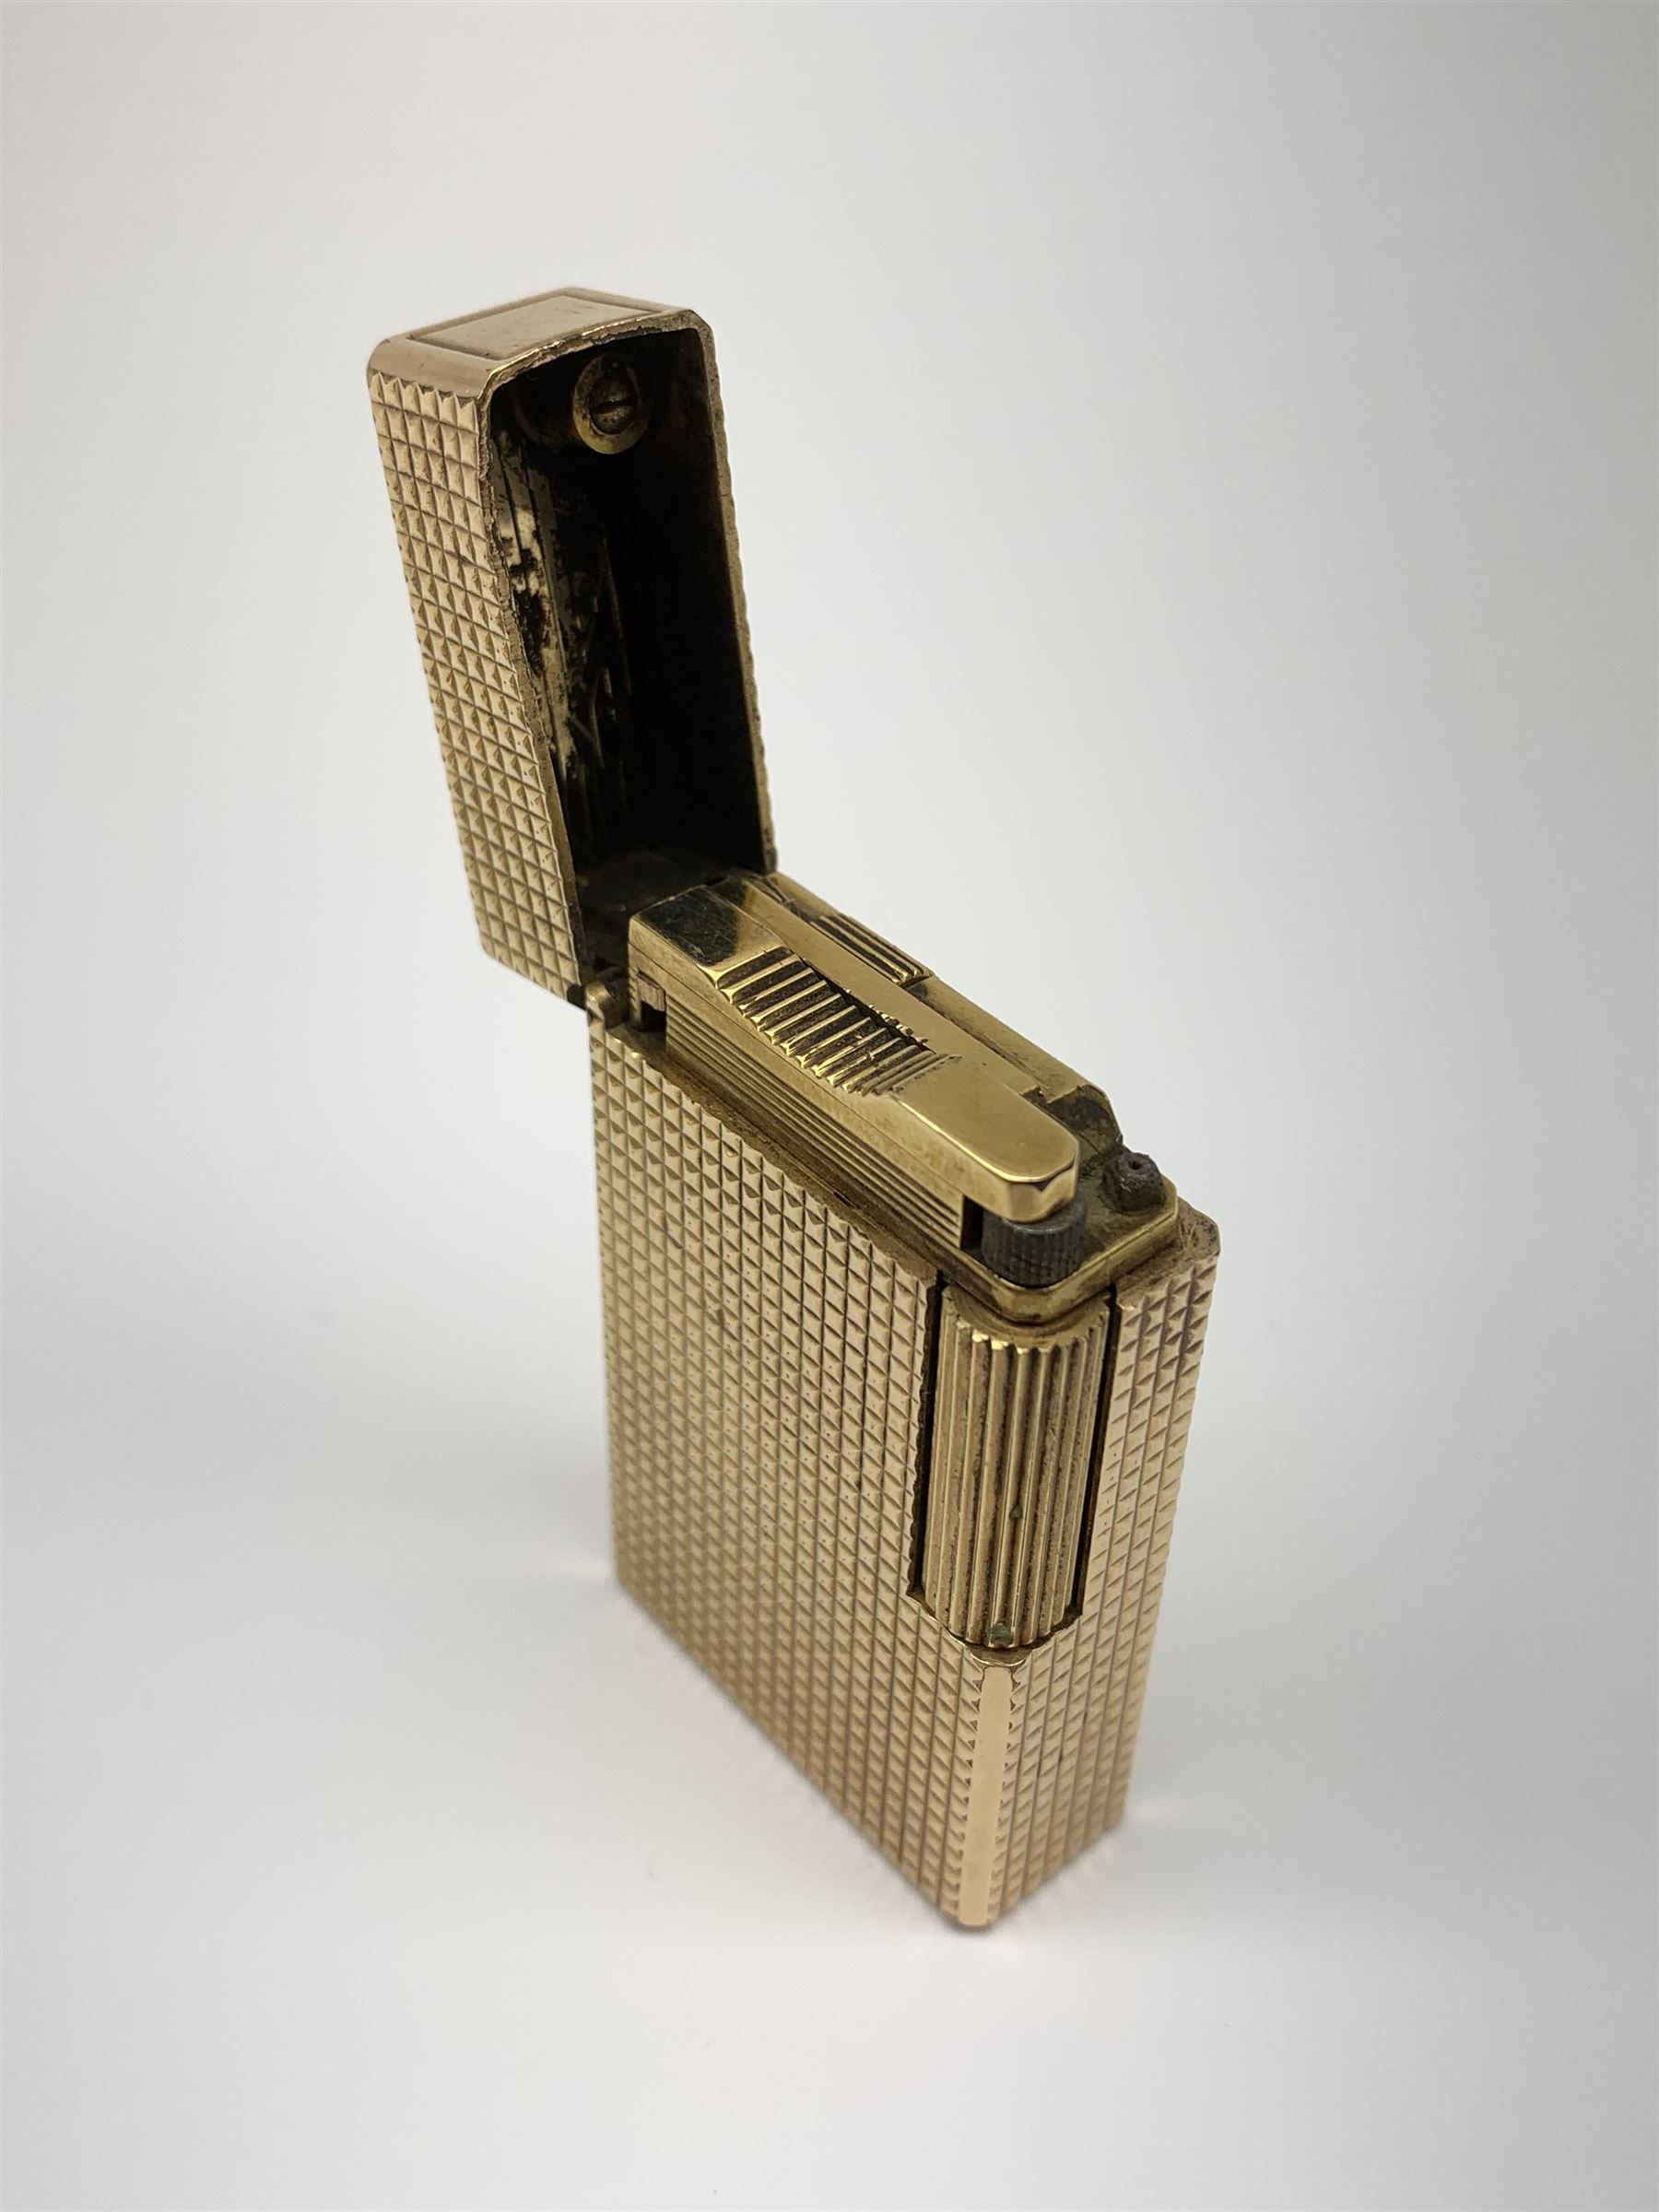 Gold-plated lighter by S.T Dupont - Image 2 of 5